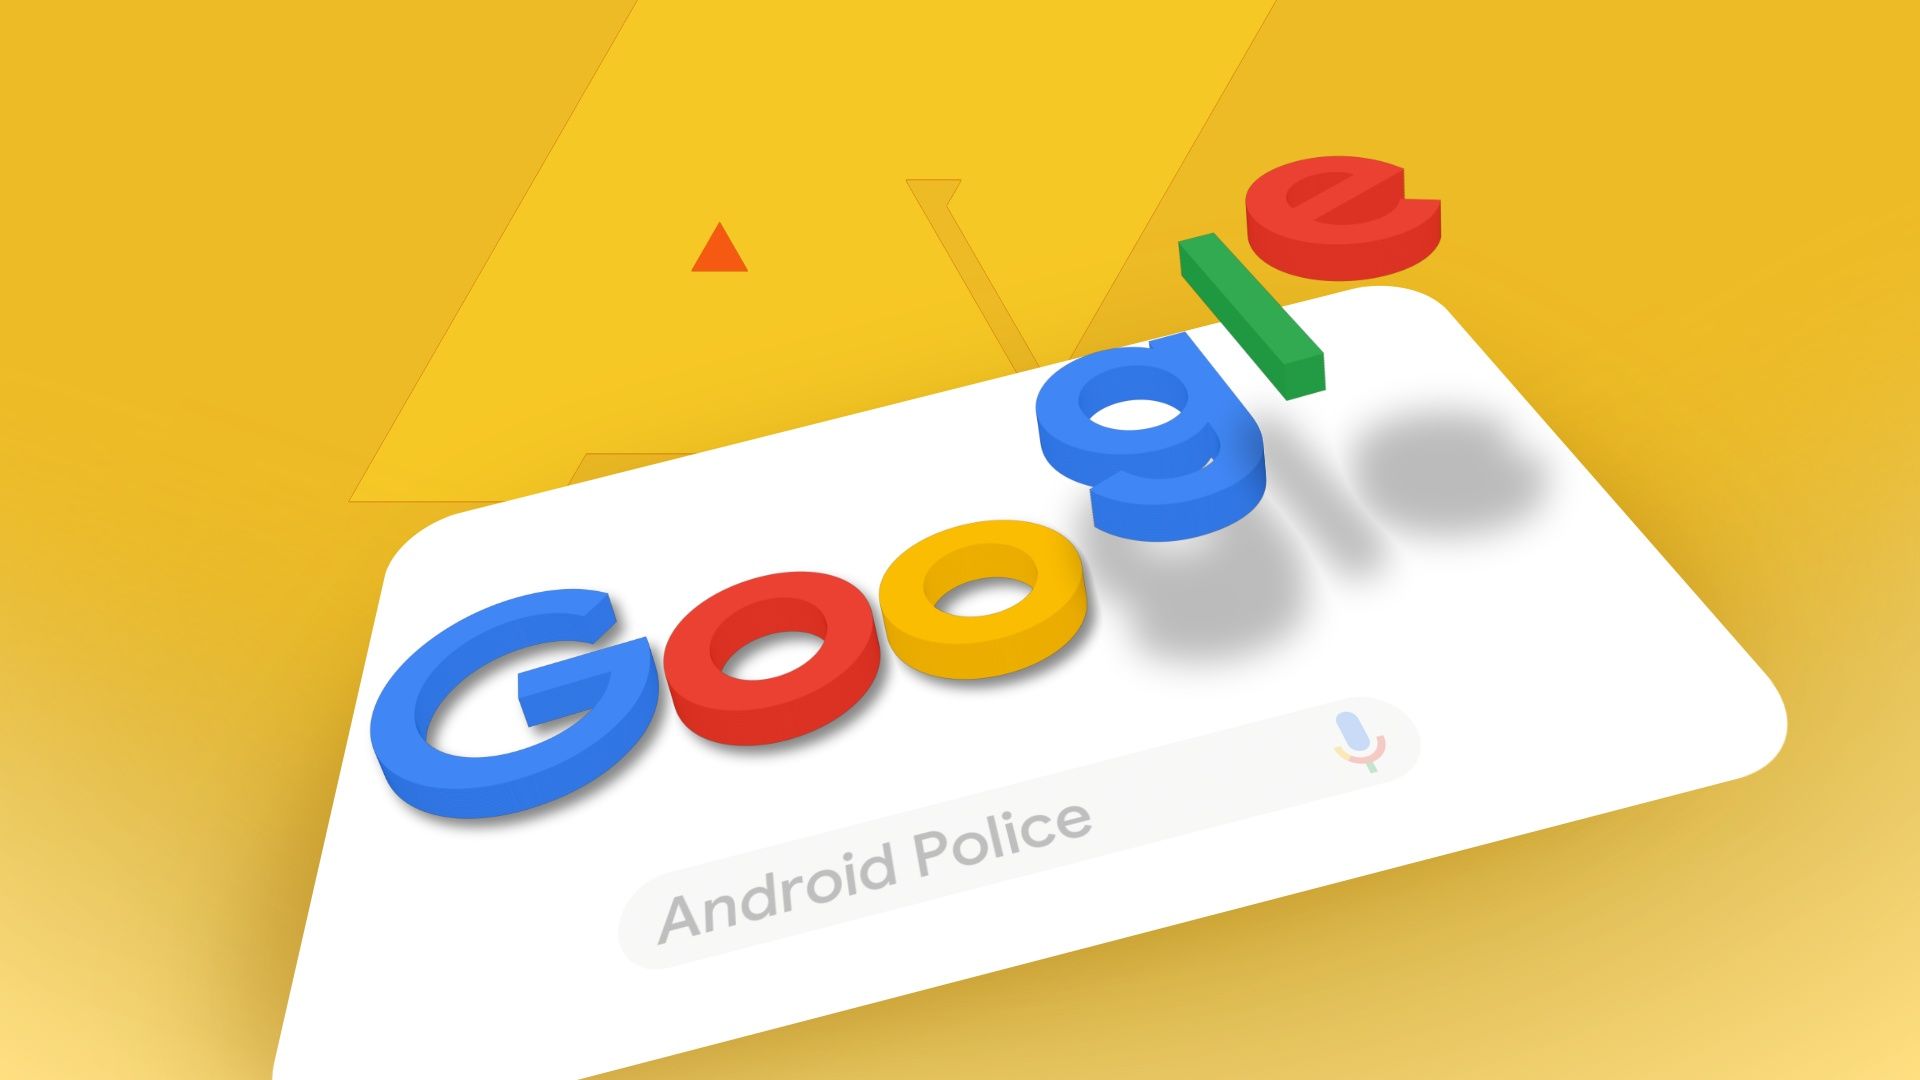 The Google letters against a white and yellow background